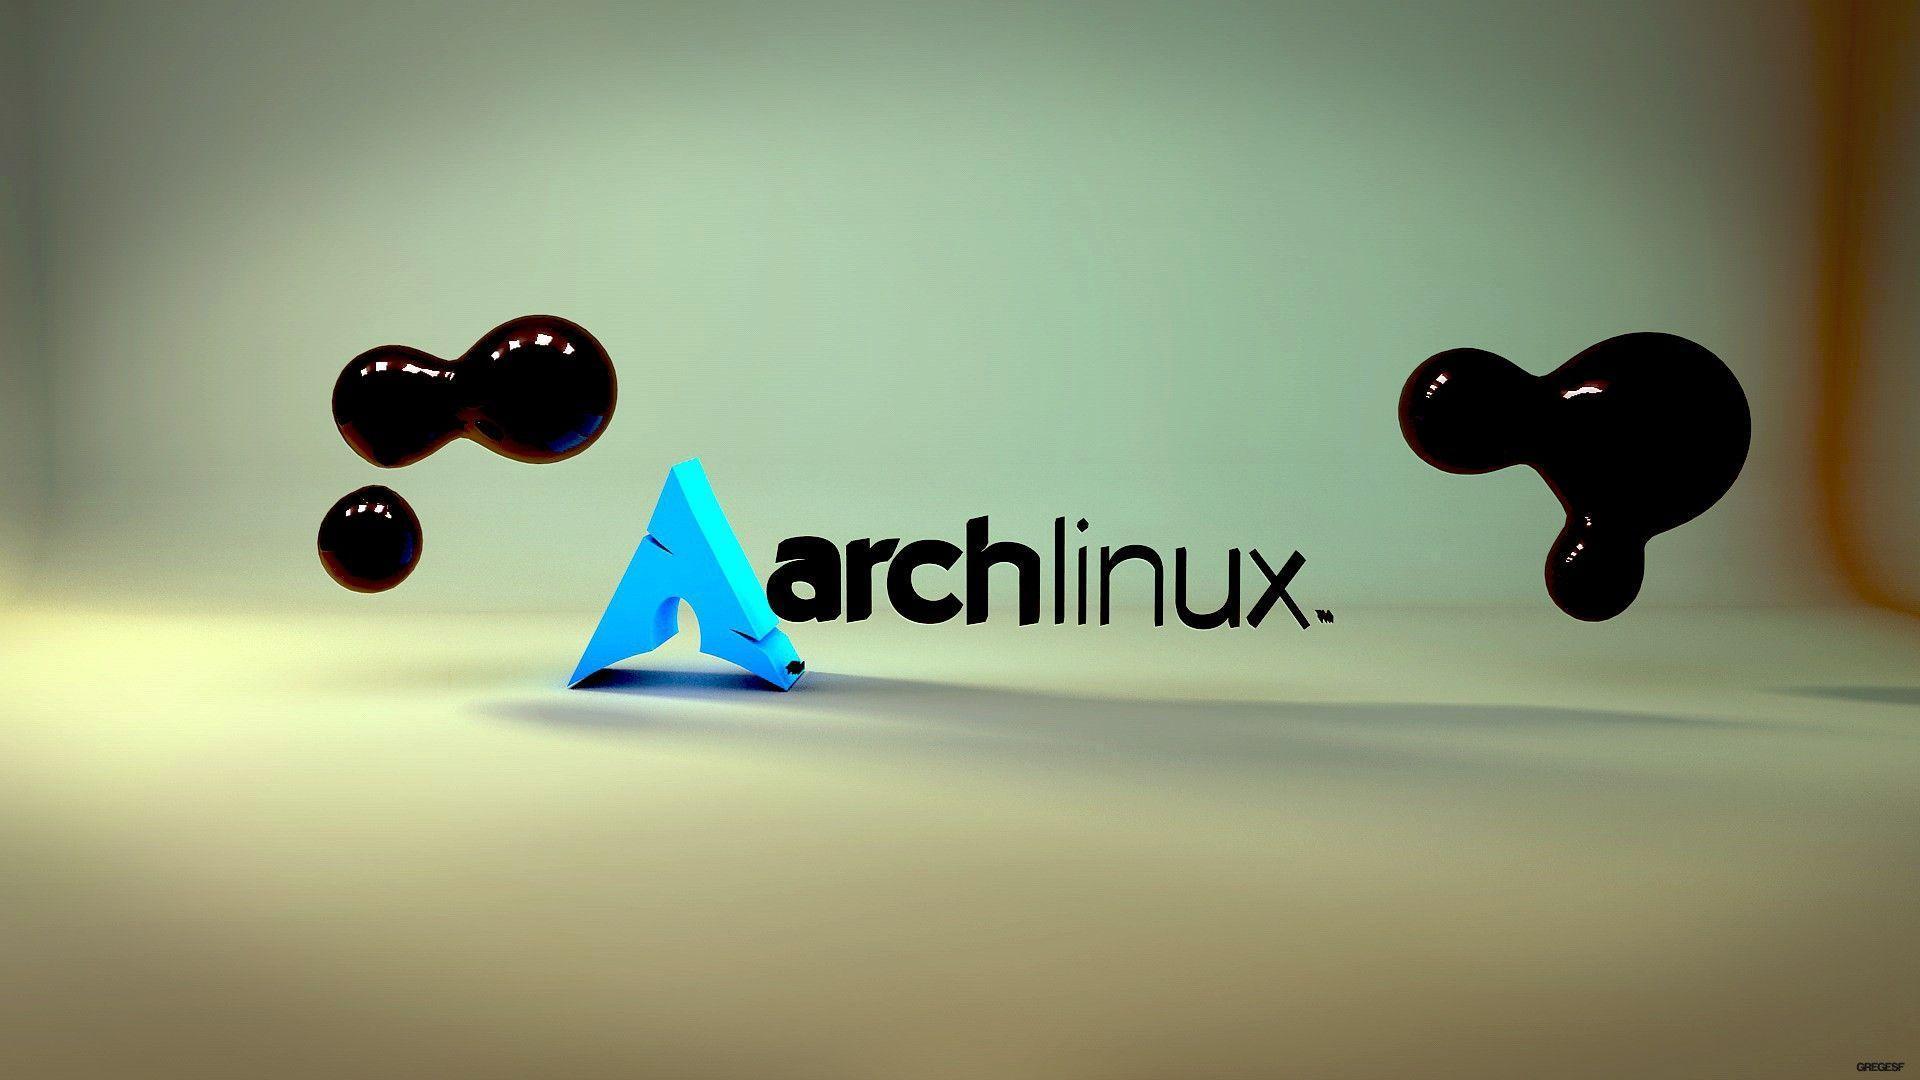 Clean Arch Linux Forums Wallpaper 1920x1080 HD